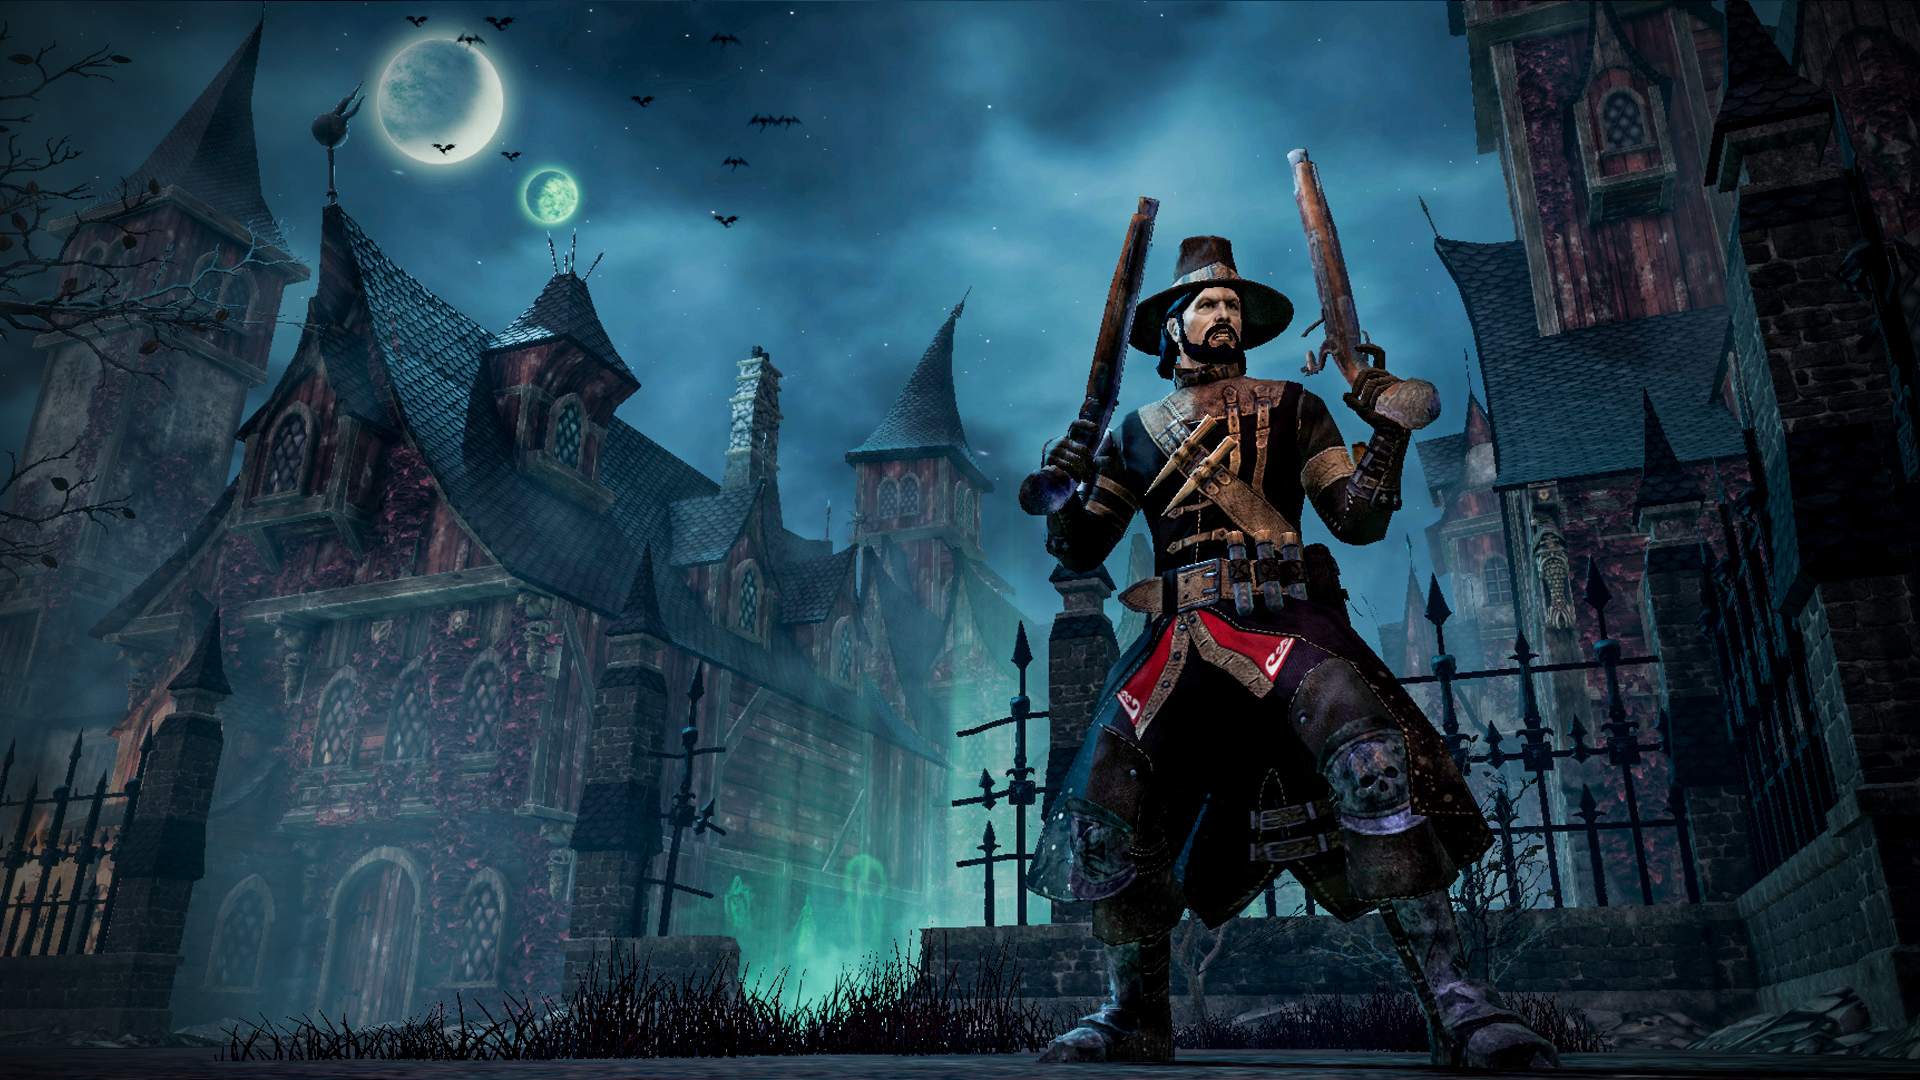 mordheim chapter 2 library witch hunters place the last black powder